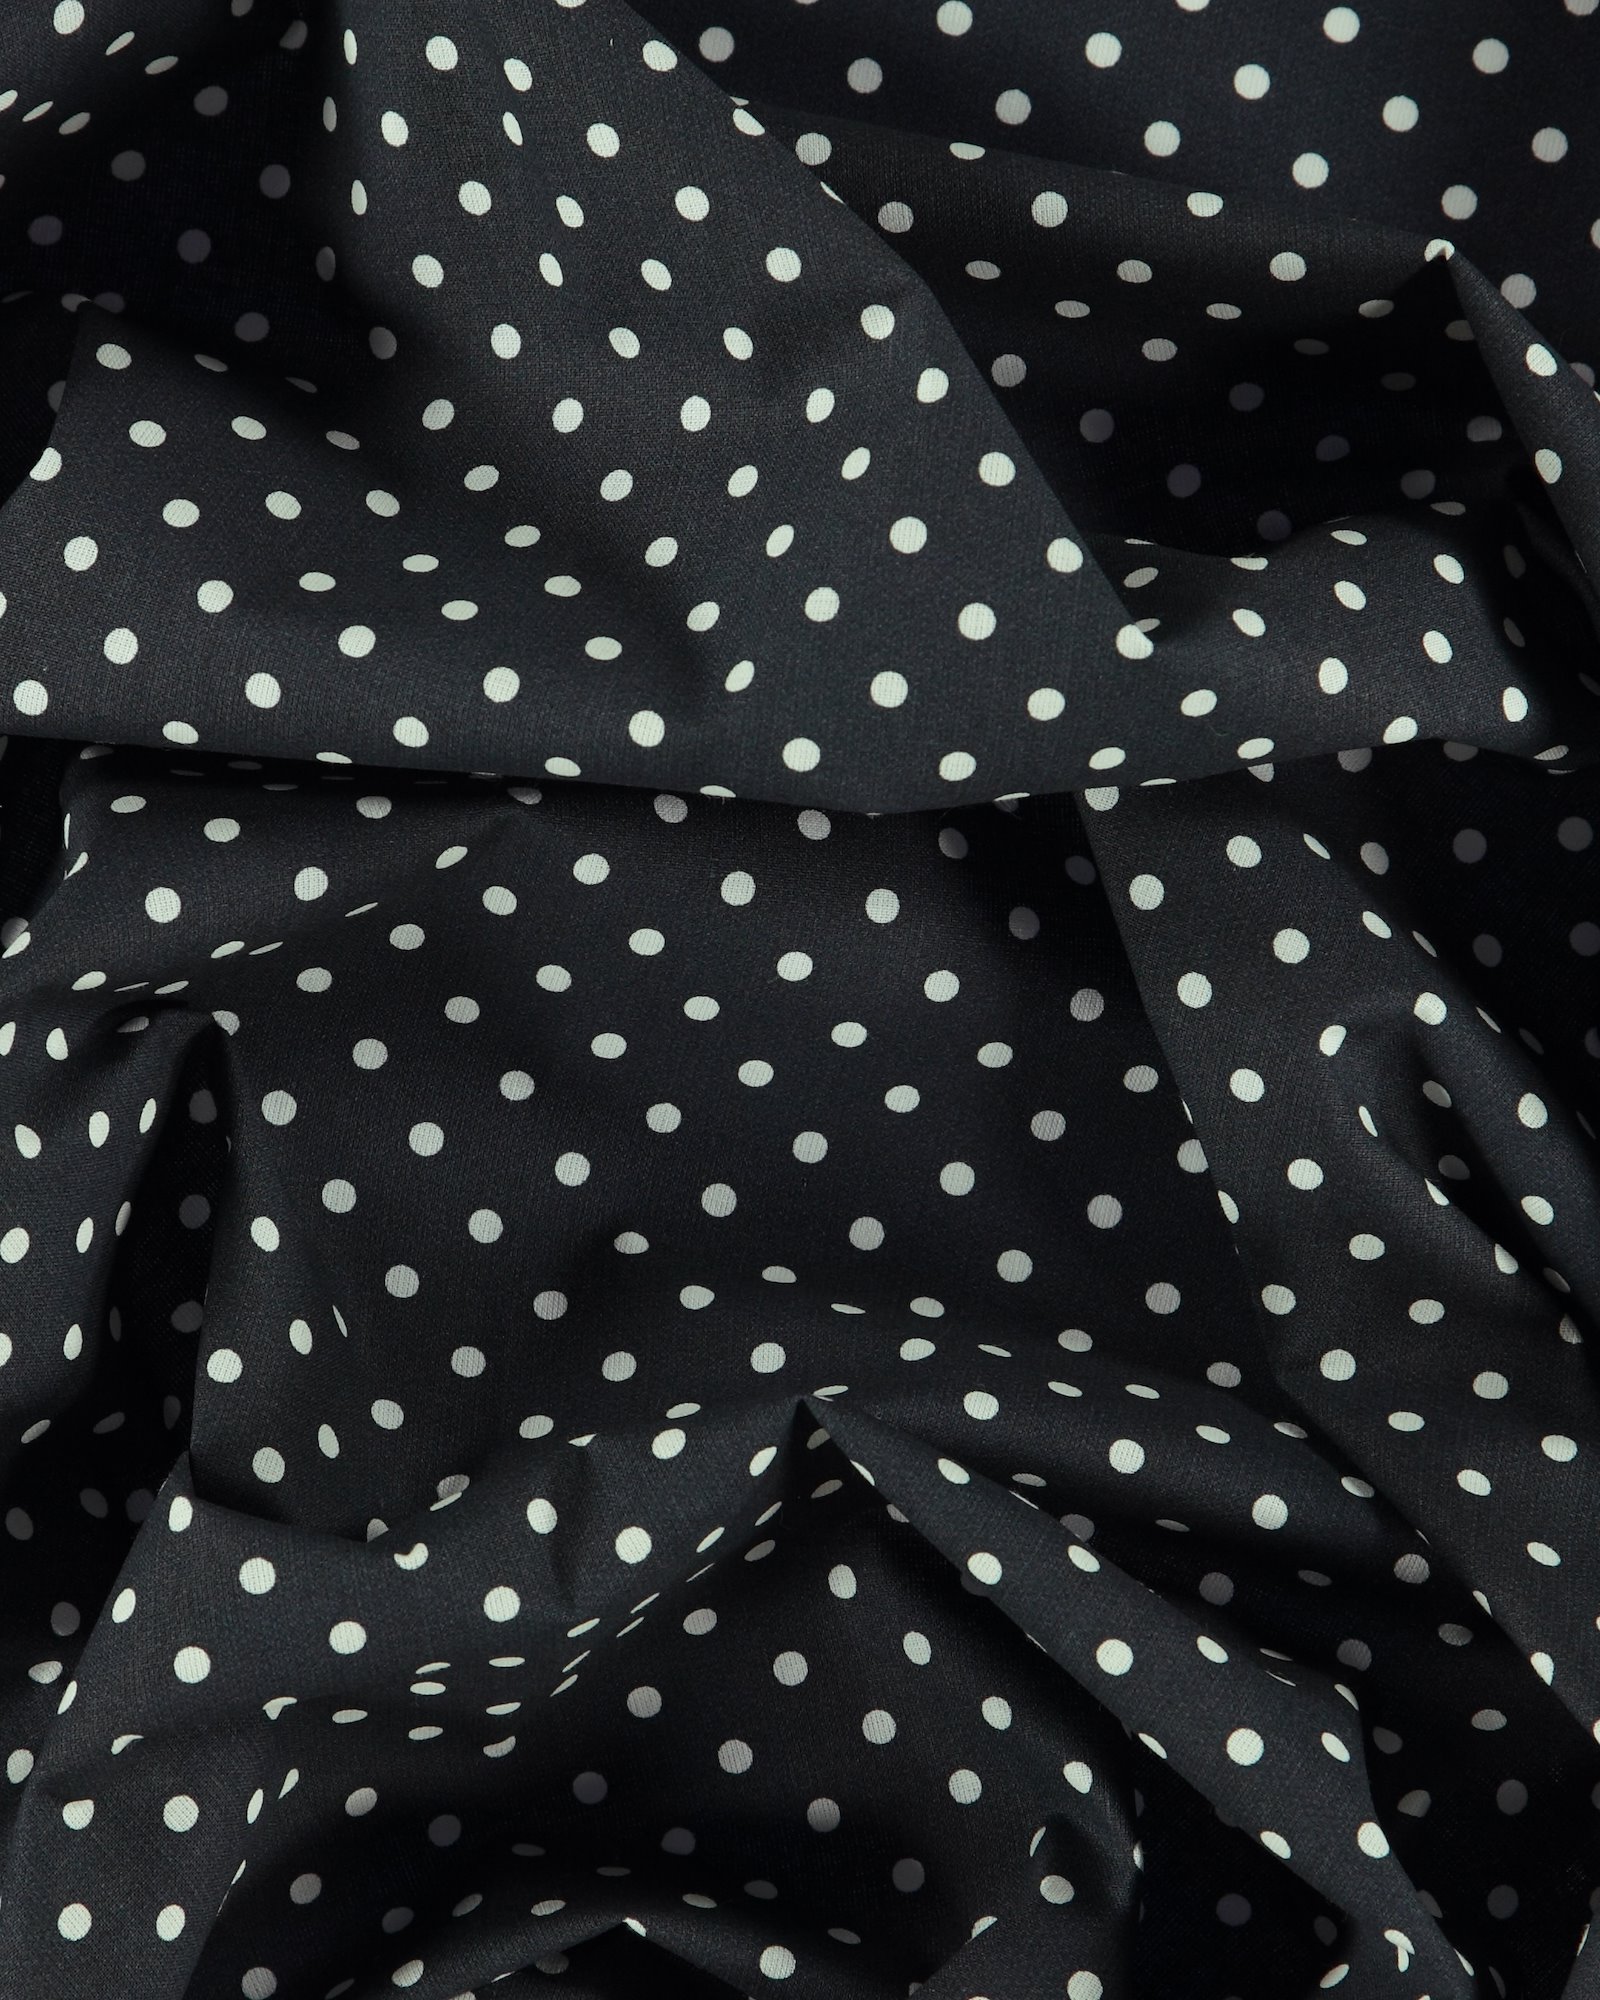 Cotton dark blue with white dots 790125_pack